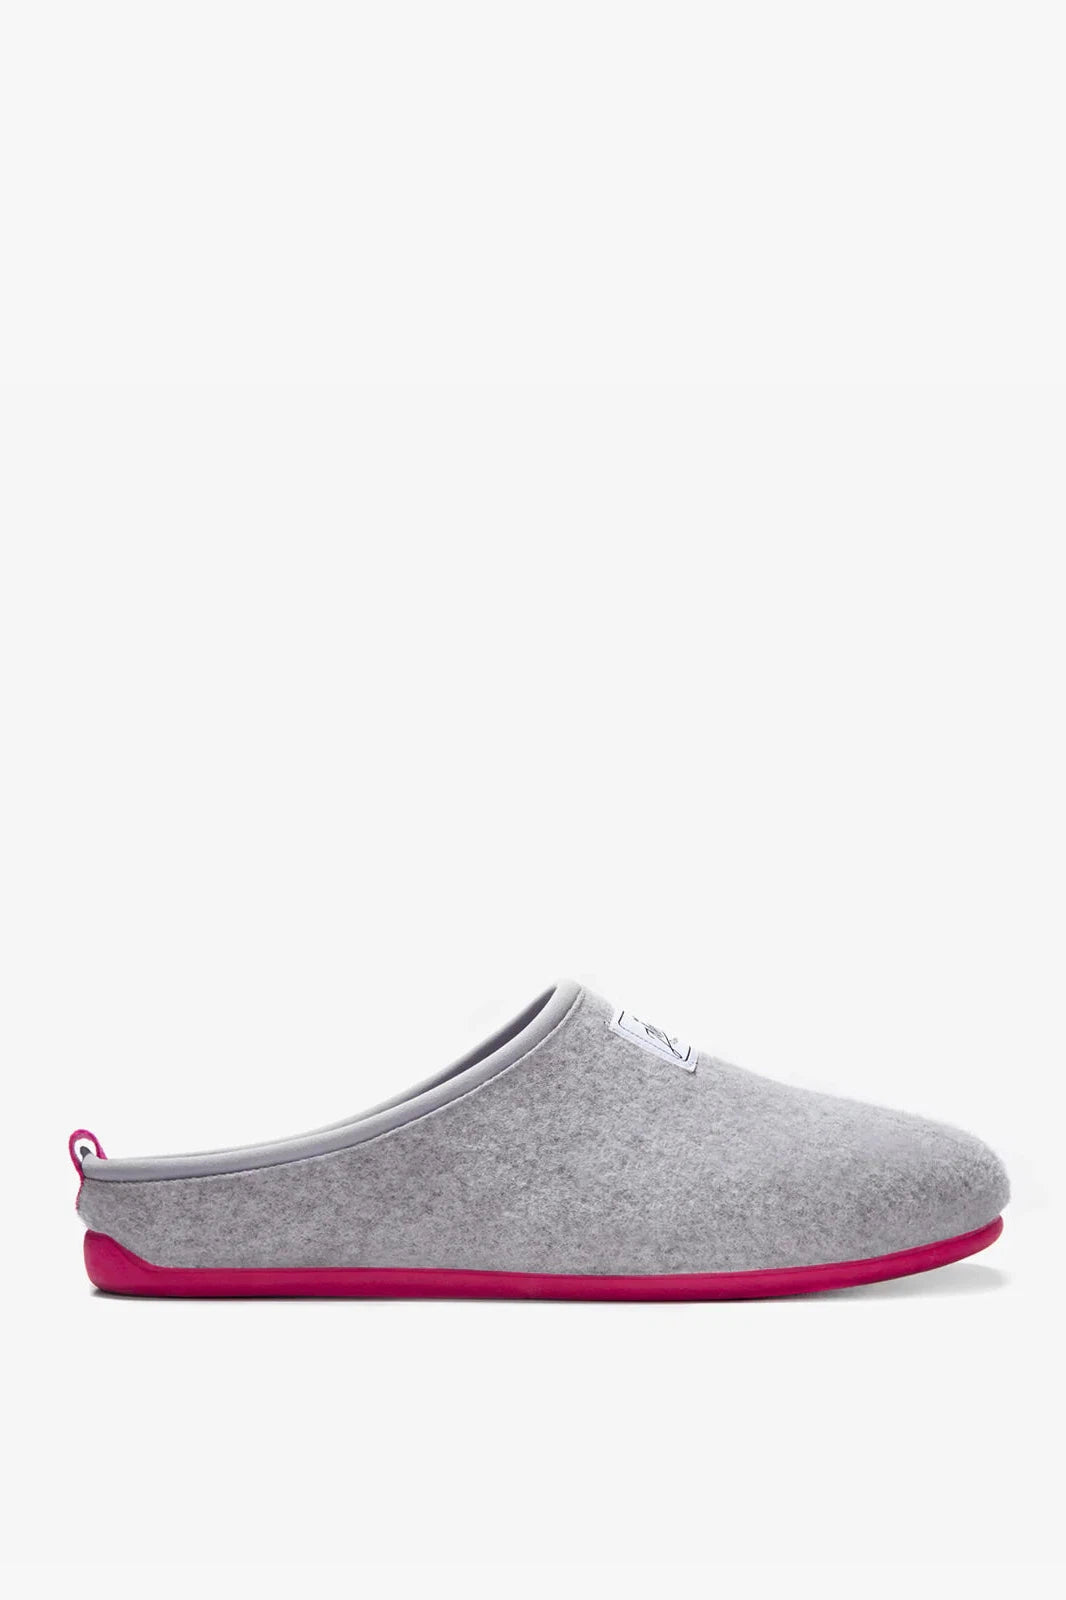 Mercredy Slipper Grey/Magenta-Womens-Ohh! By Gum - Shop Sustainable